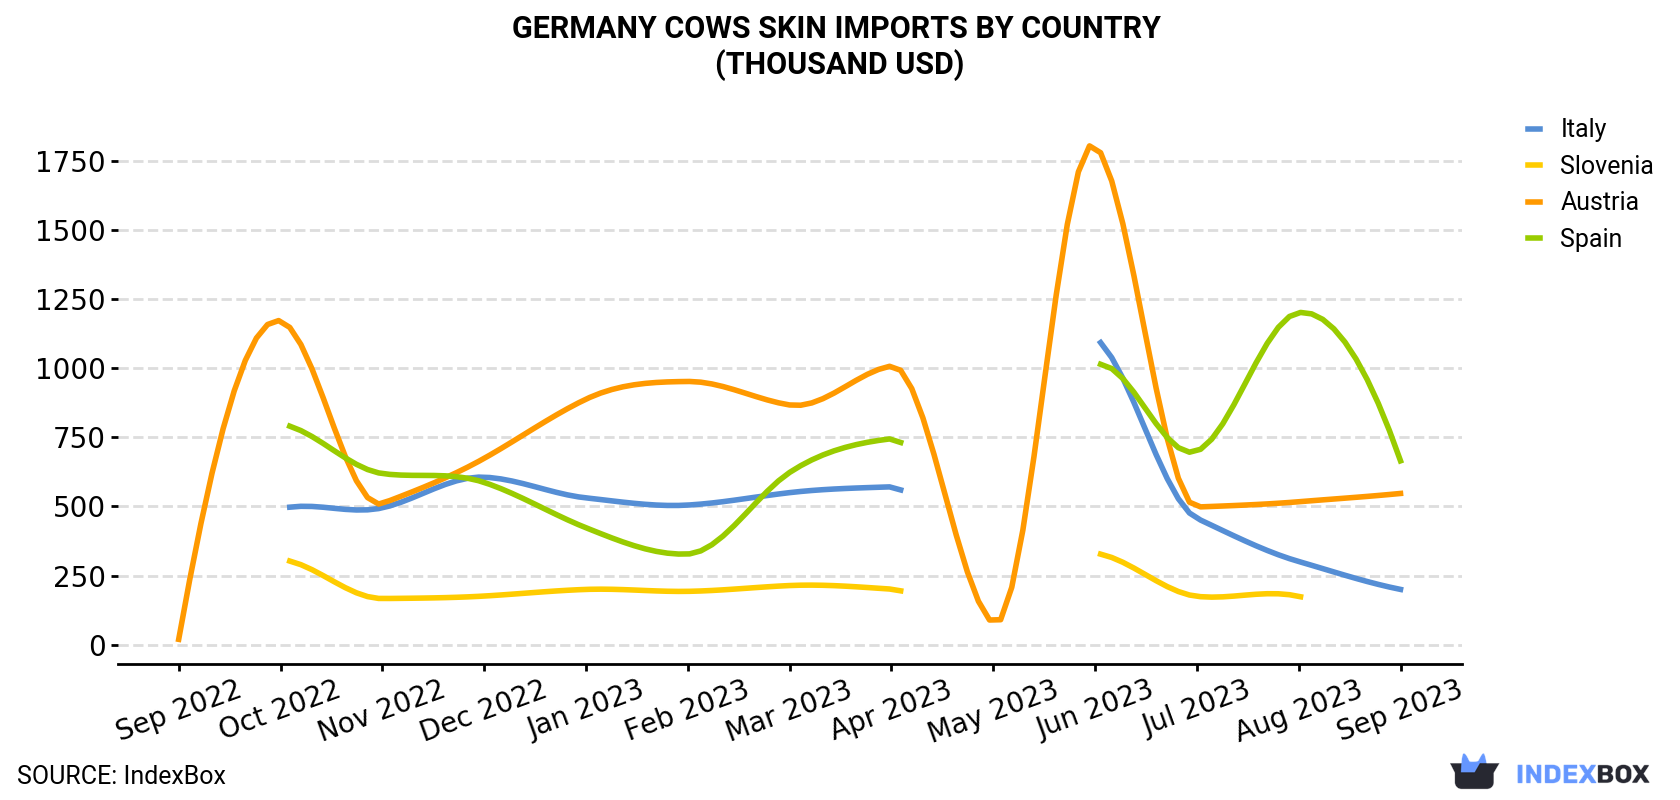 Germany Cows Skin Imports By Country (Thousand USD)